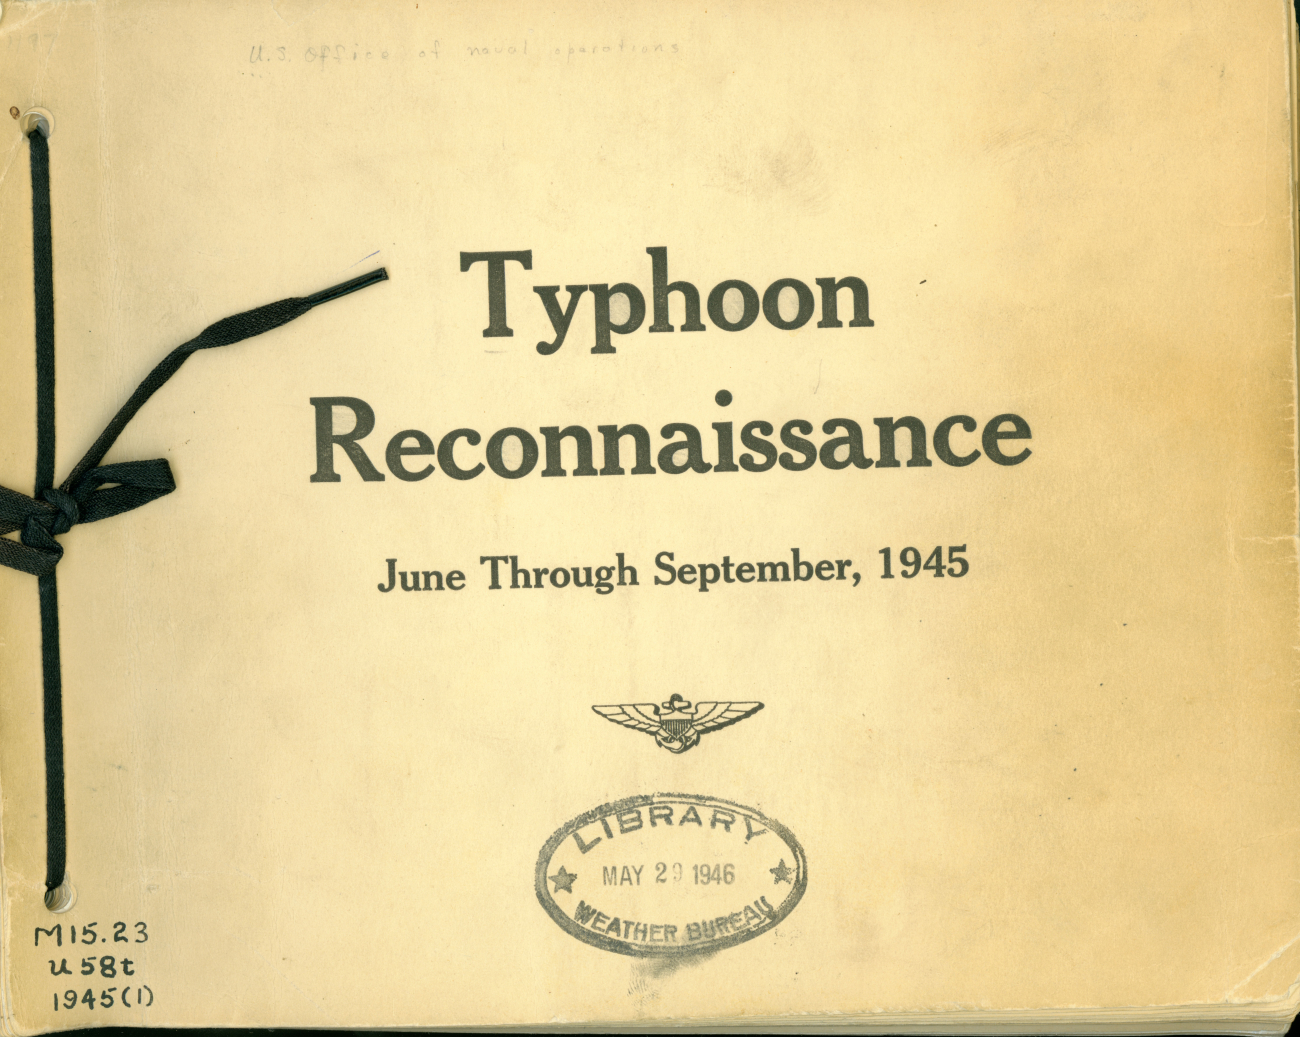 A record of typhoon reconnaissance in the western tropical Pacific in the months June through September, 1945